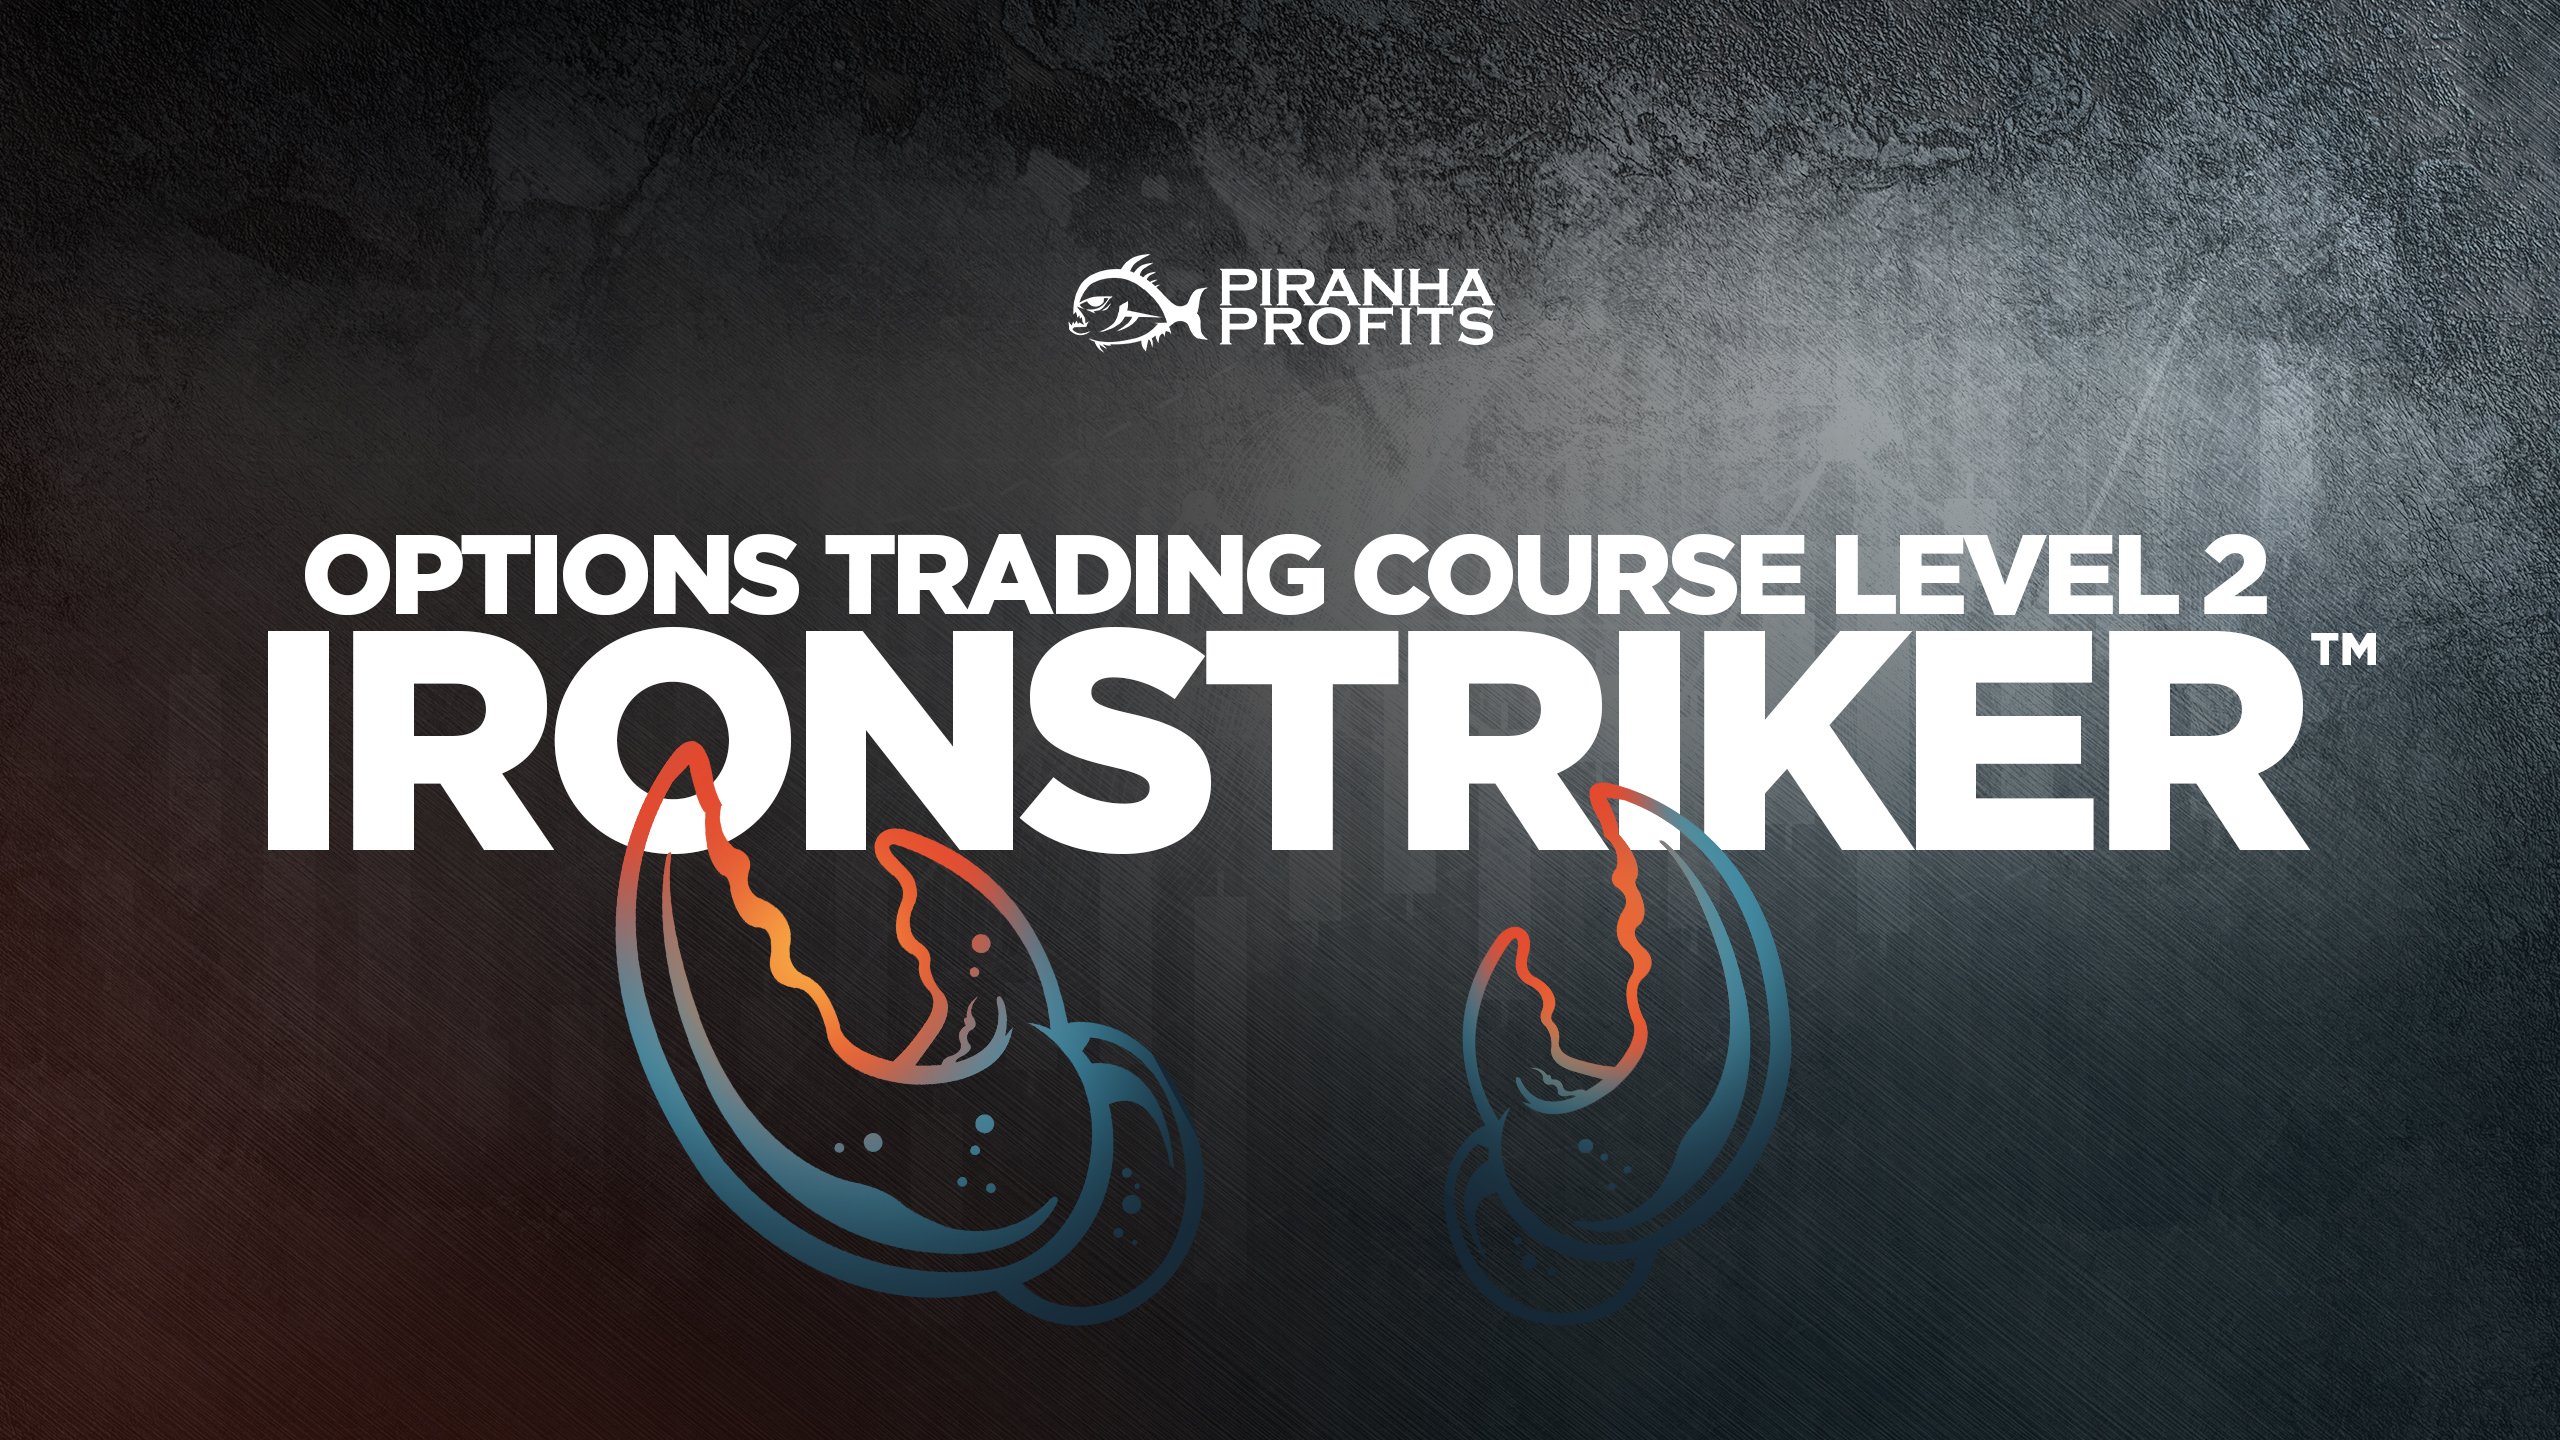 Online options trading course Options Ironstriker banner